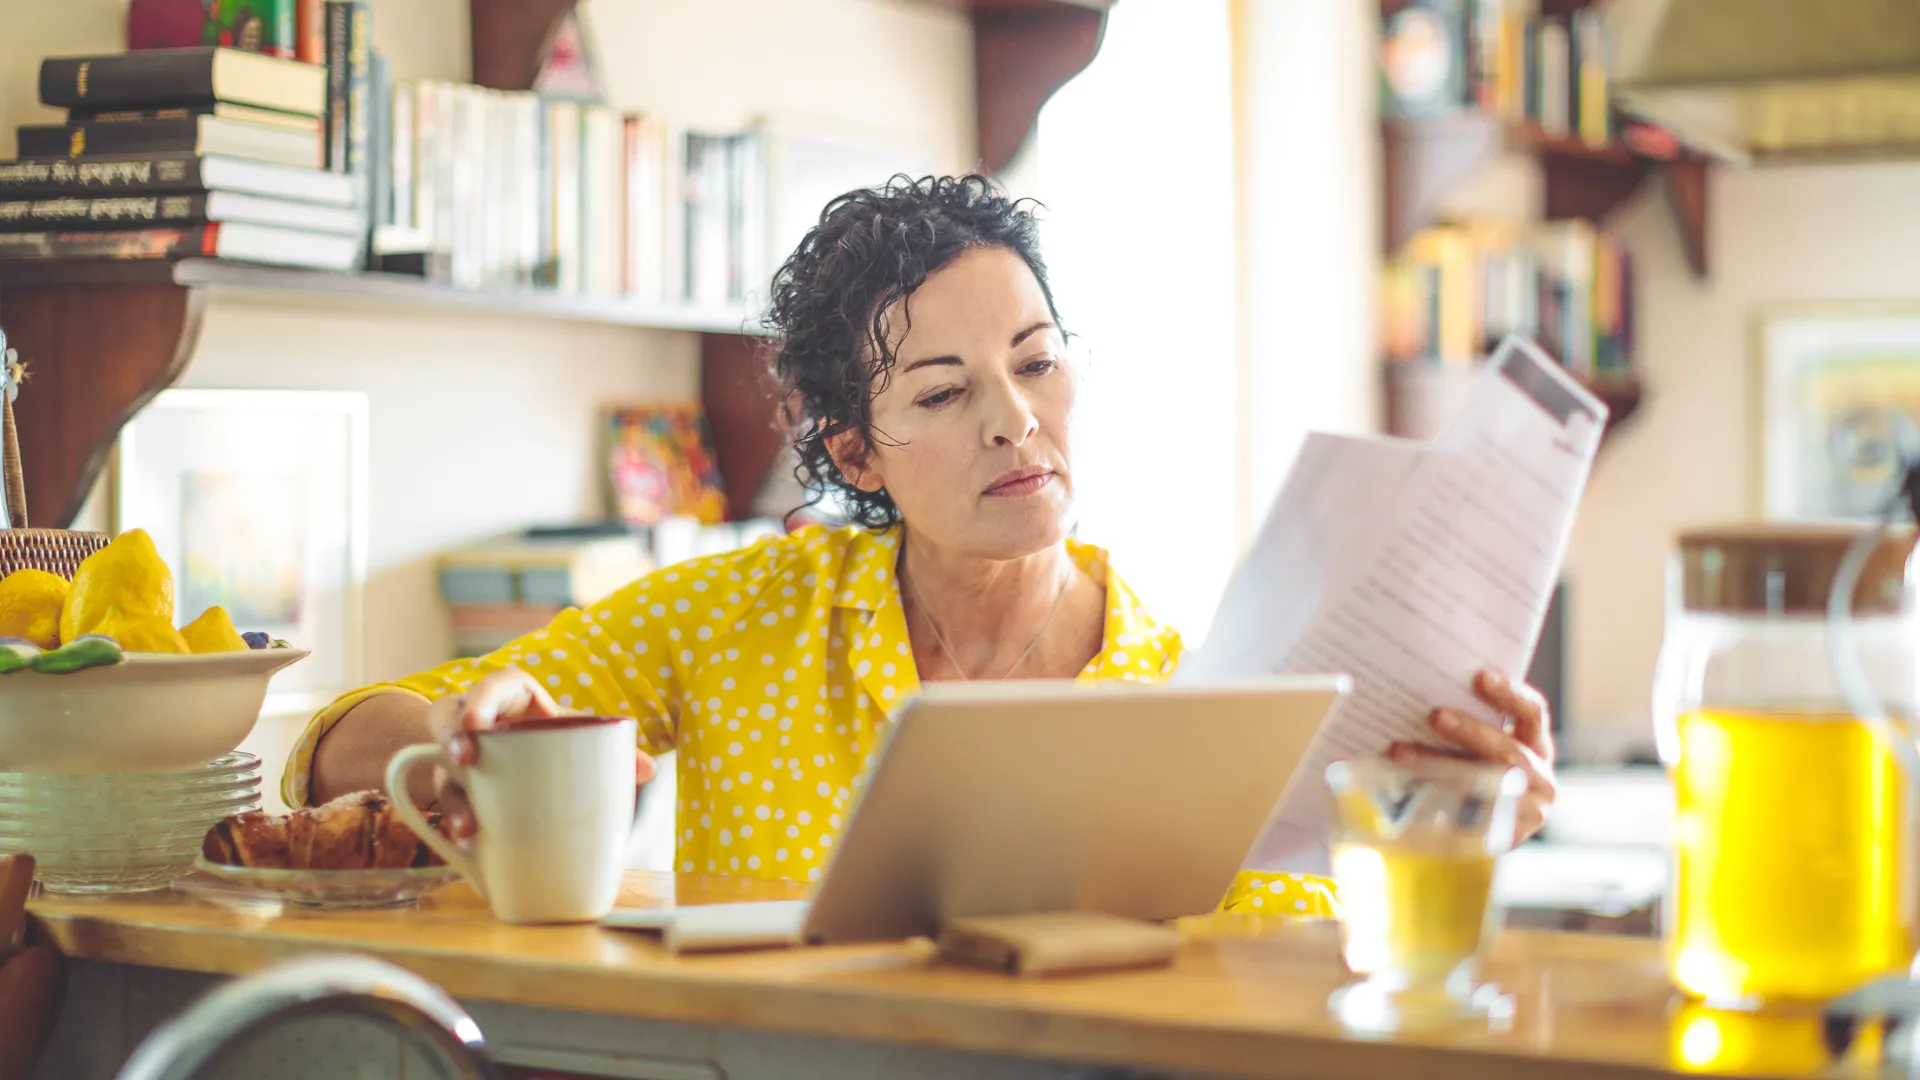 Mature woman is checking her finances at home.